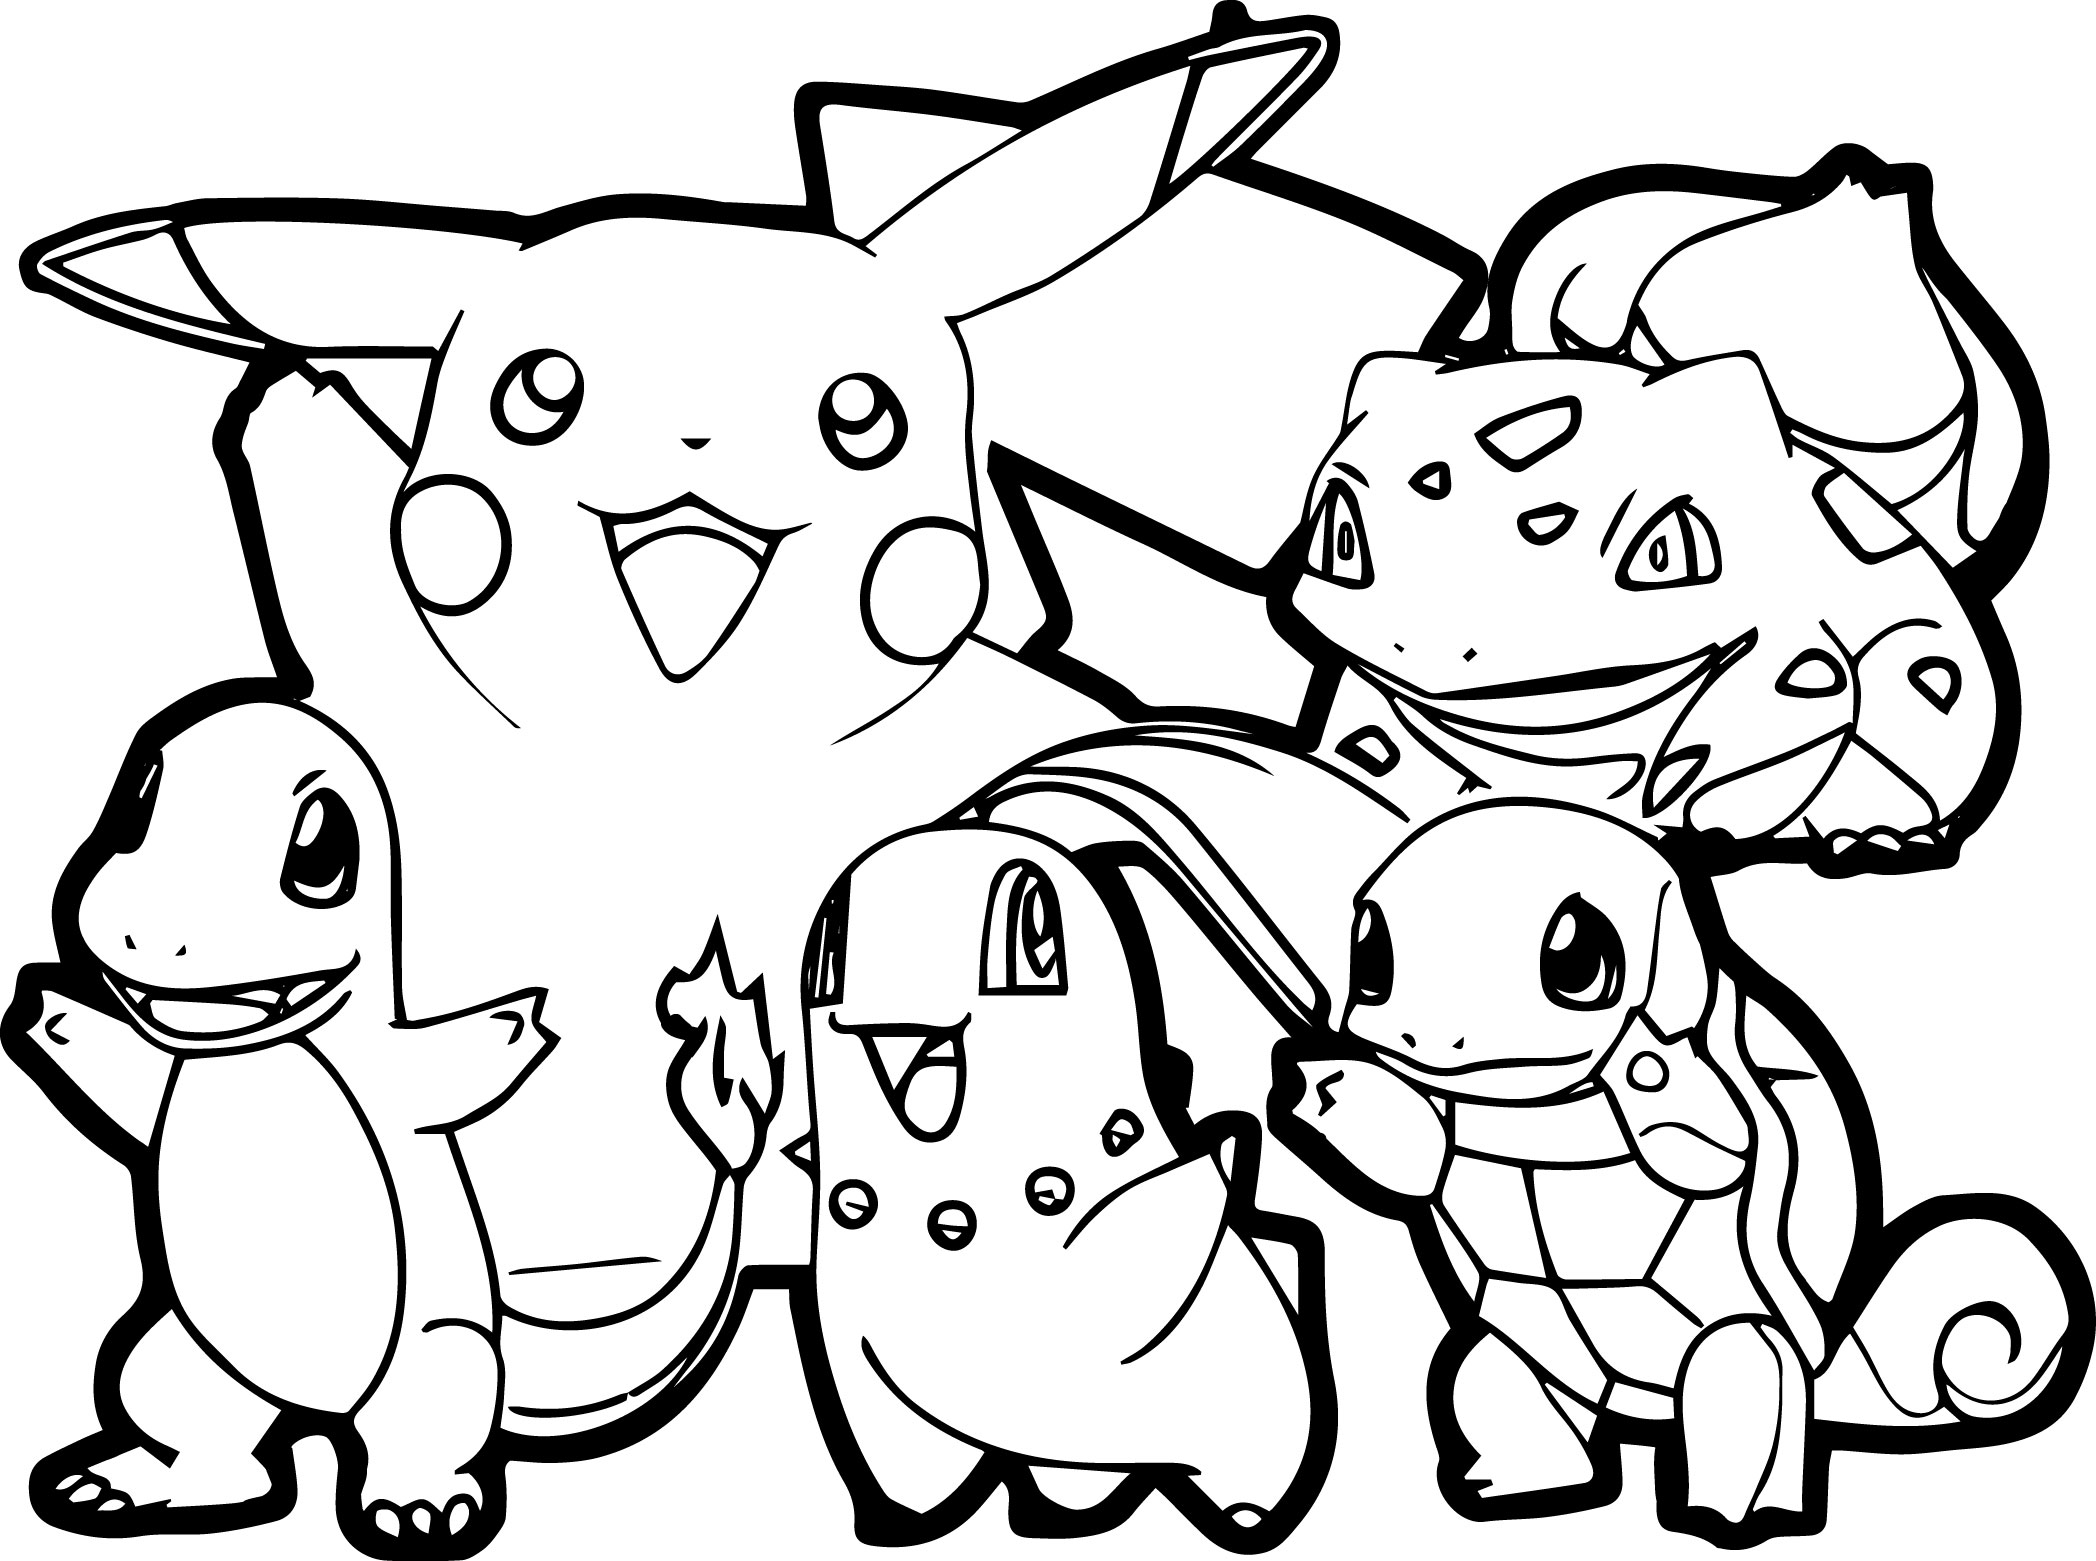 all-pokemon-coloring-pages-free-printable-coloring-pages-for-kids